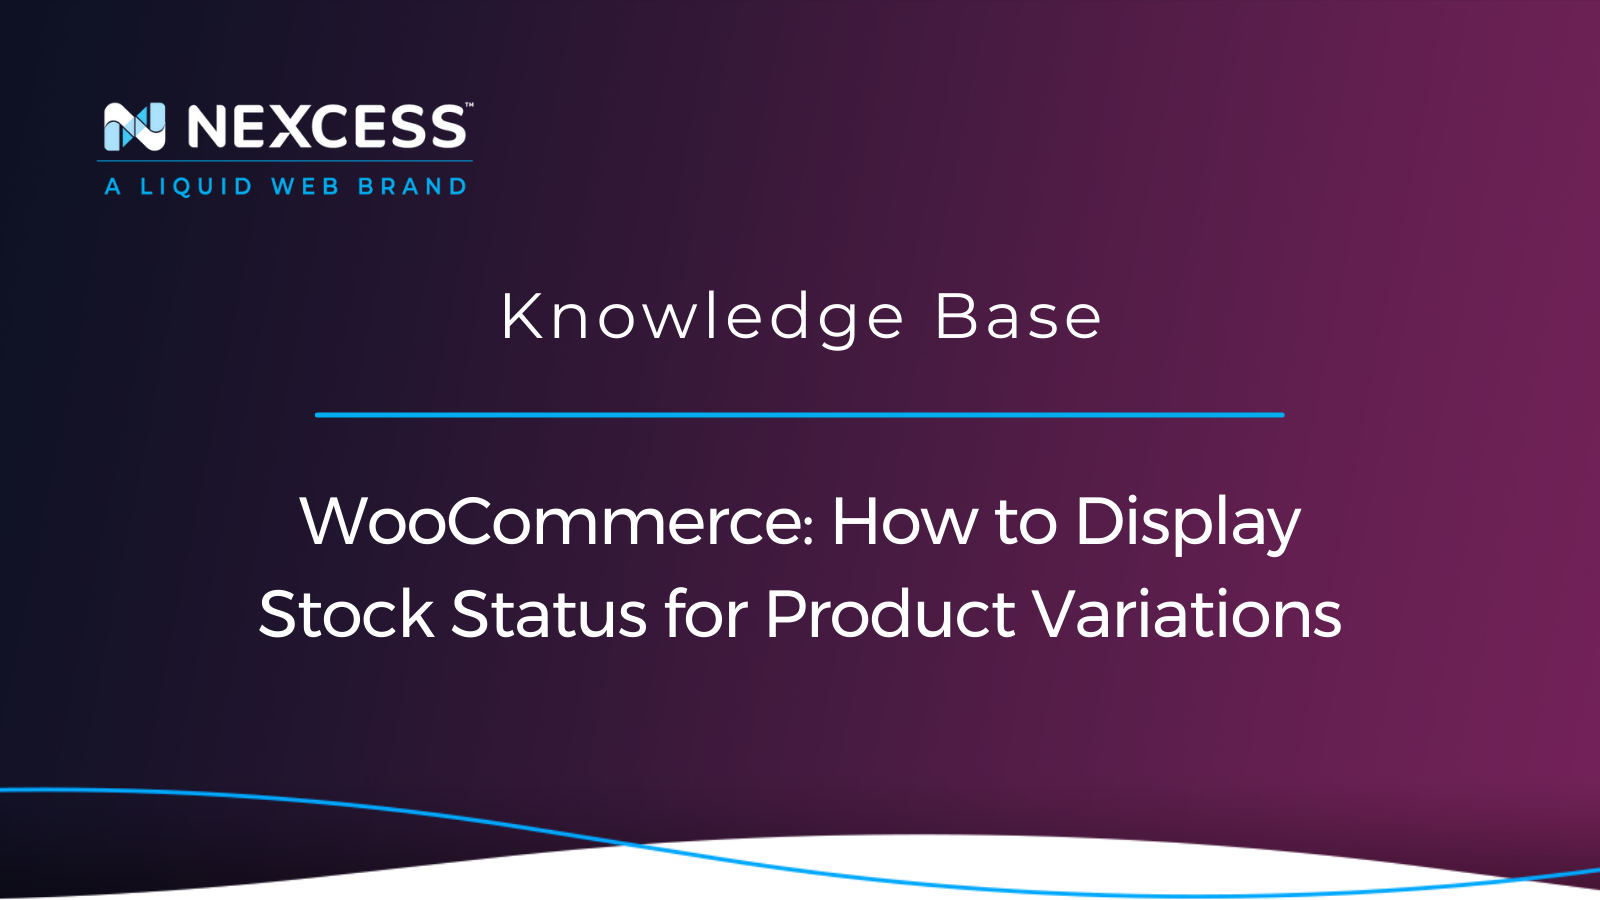 WooCommerce: How to Display Stock Status for Product Variations